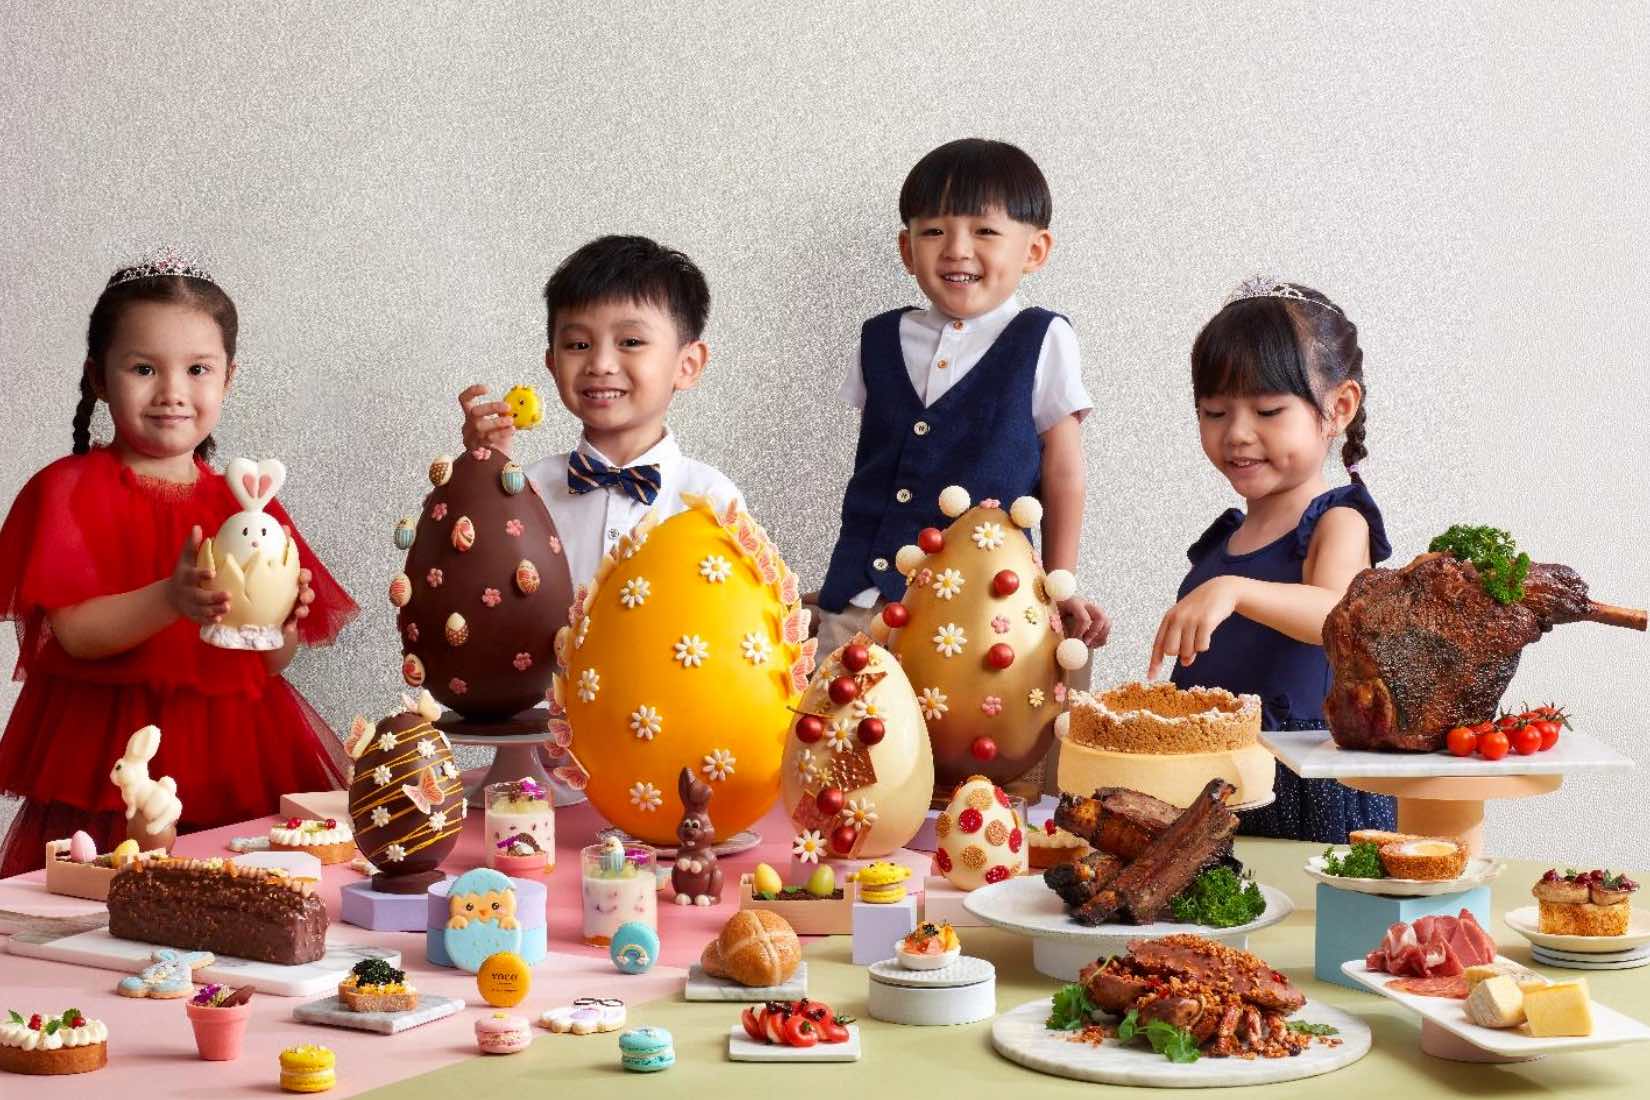 , Hop into these joyful Easter feasts and brunches for the whole family